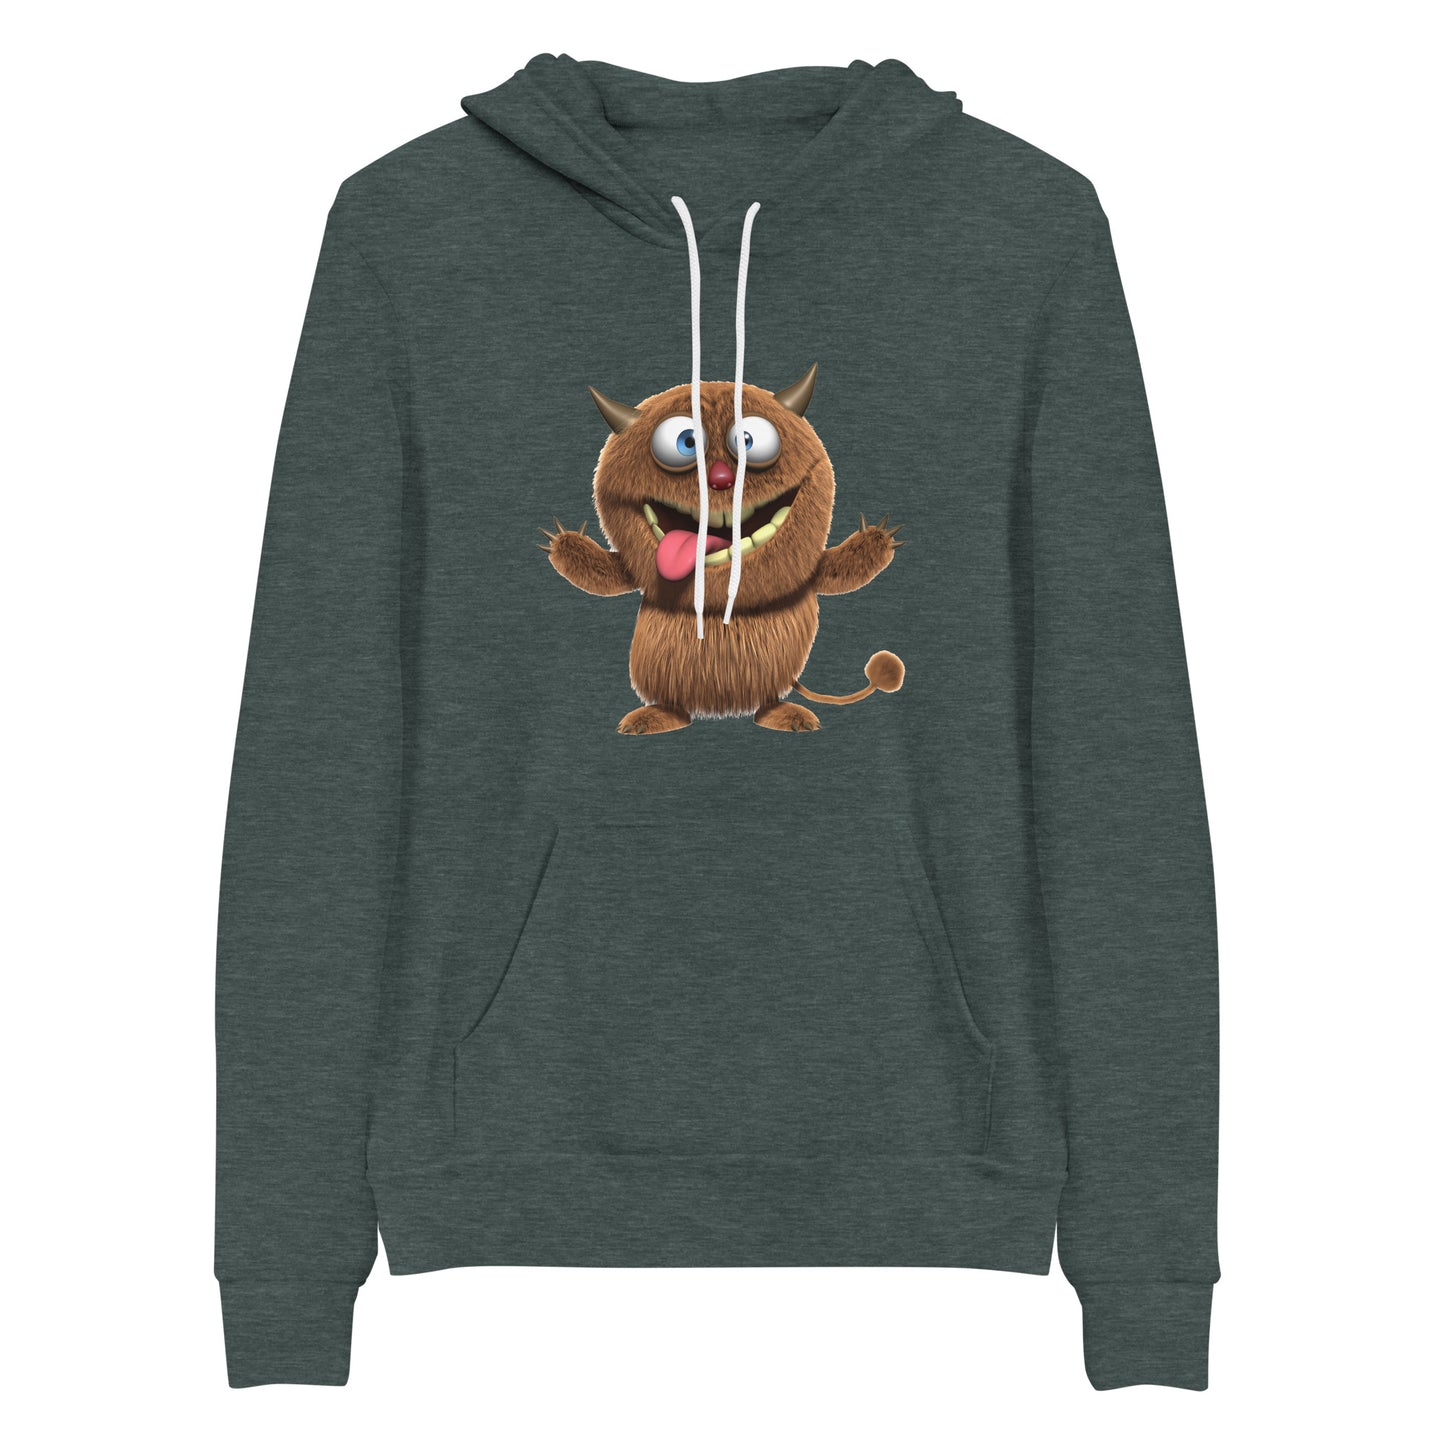 Beyond Soft THUMPER HOODIE - Comfy Pulphouse Fiction Magazine Unisex Hoodie